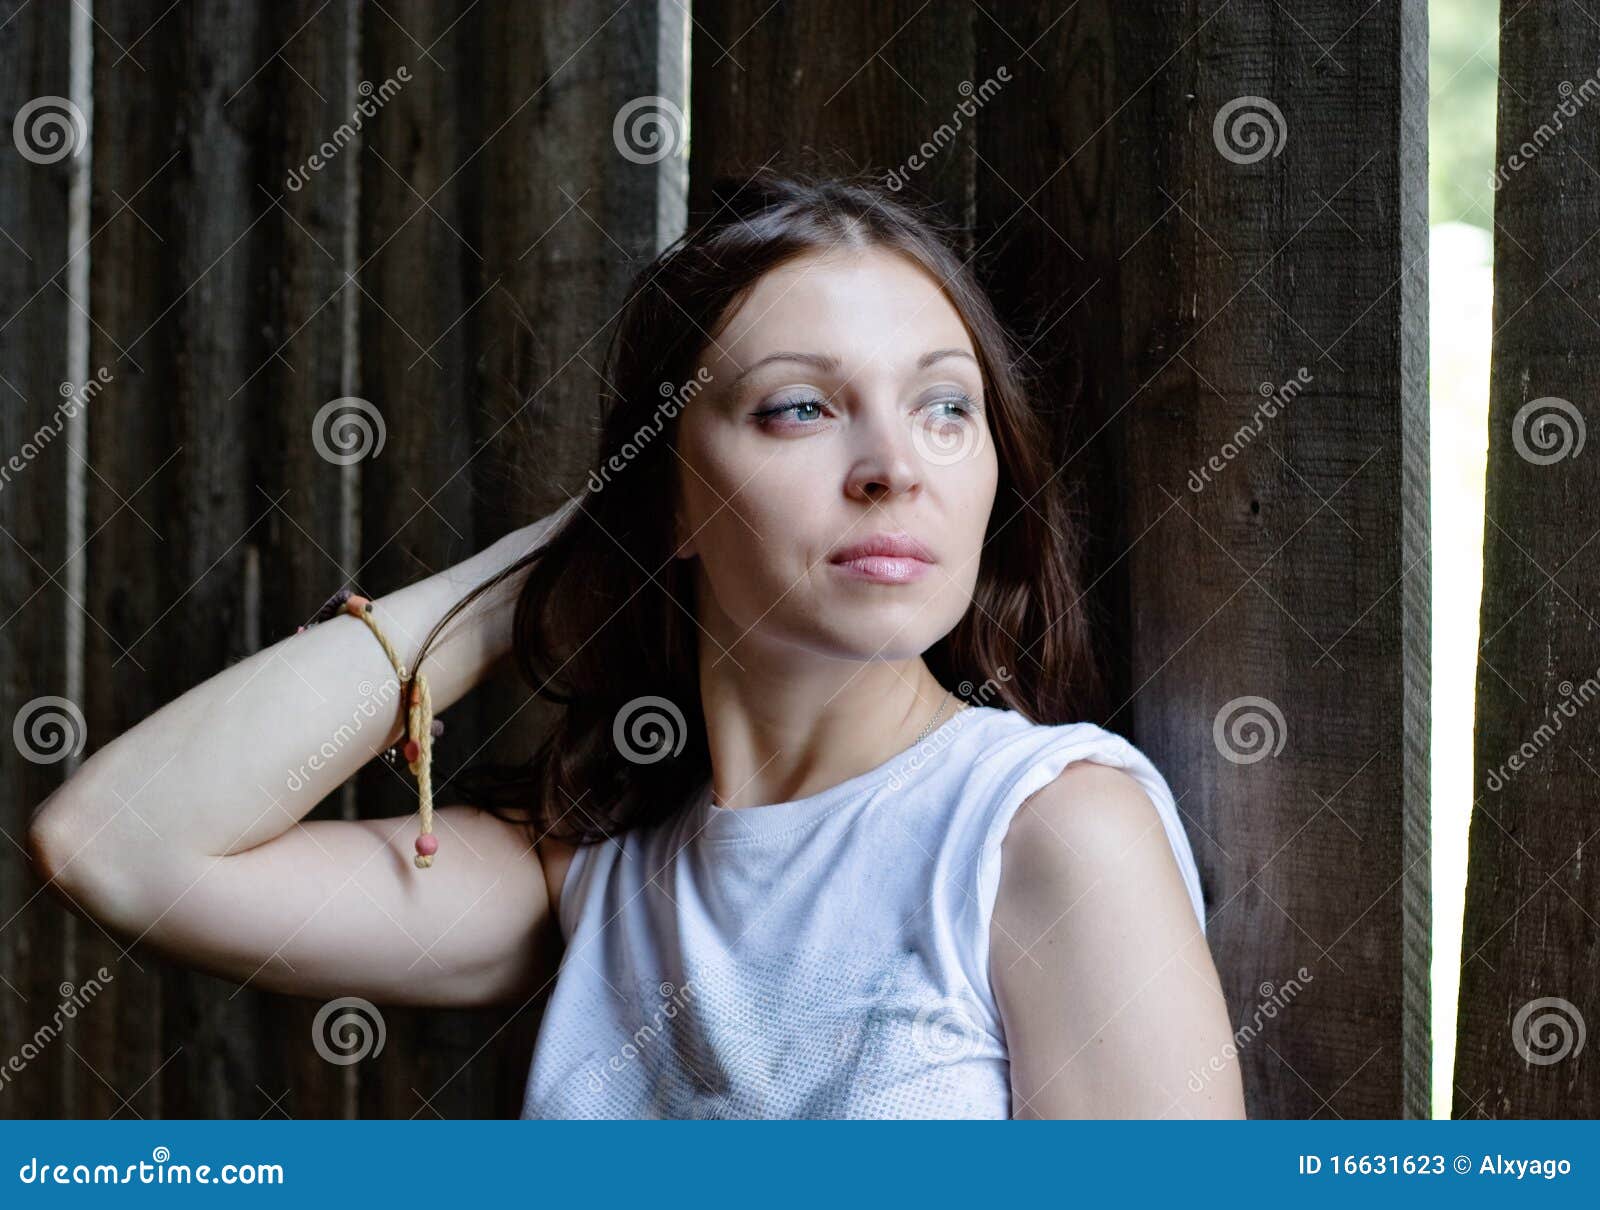 Woman Against A Wooden Wall Stock Image Image Of Beautiful Hardwood